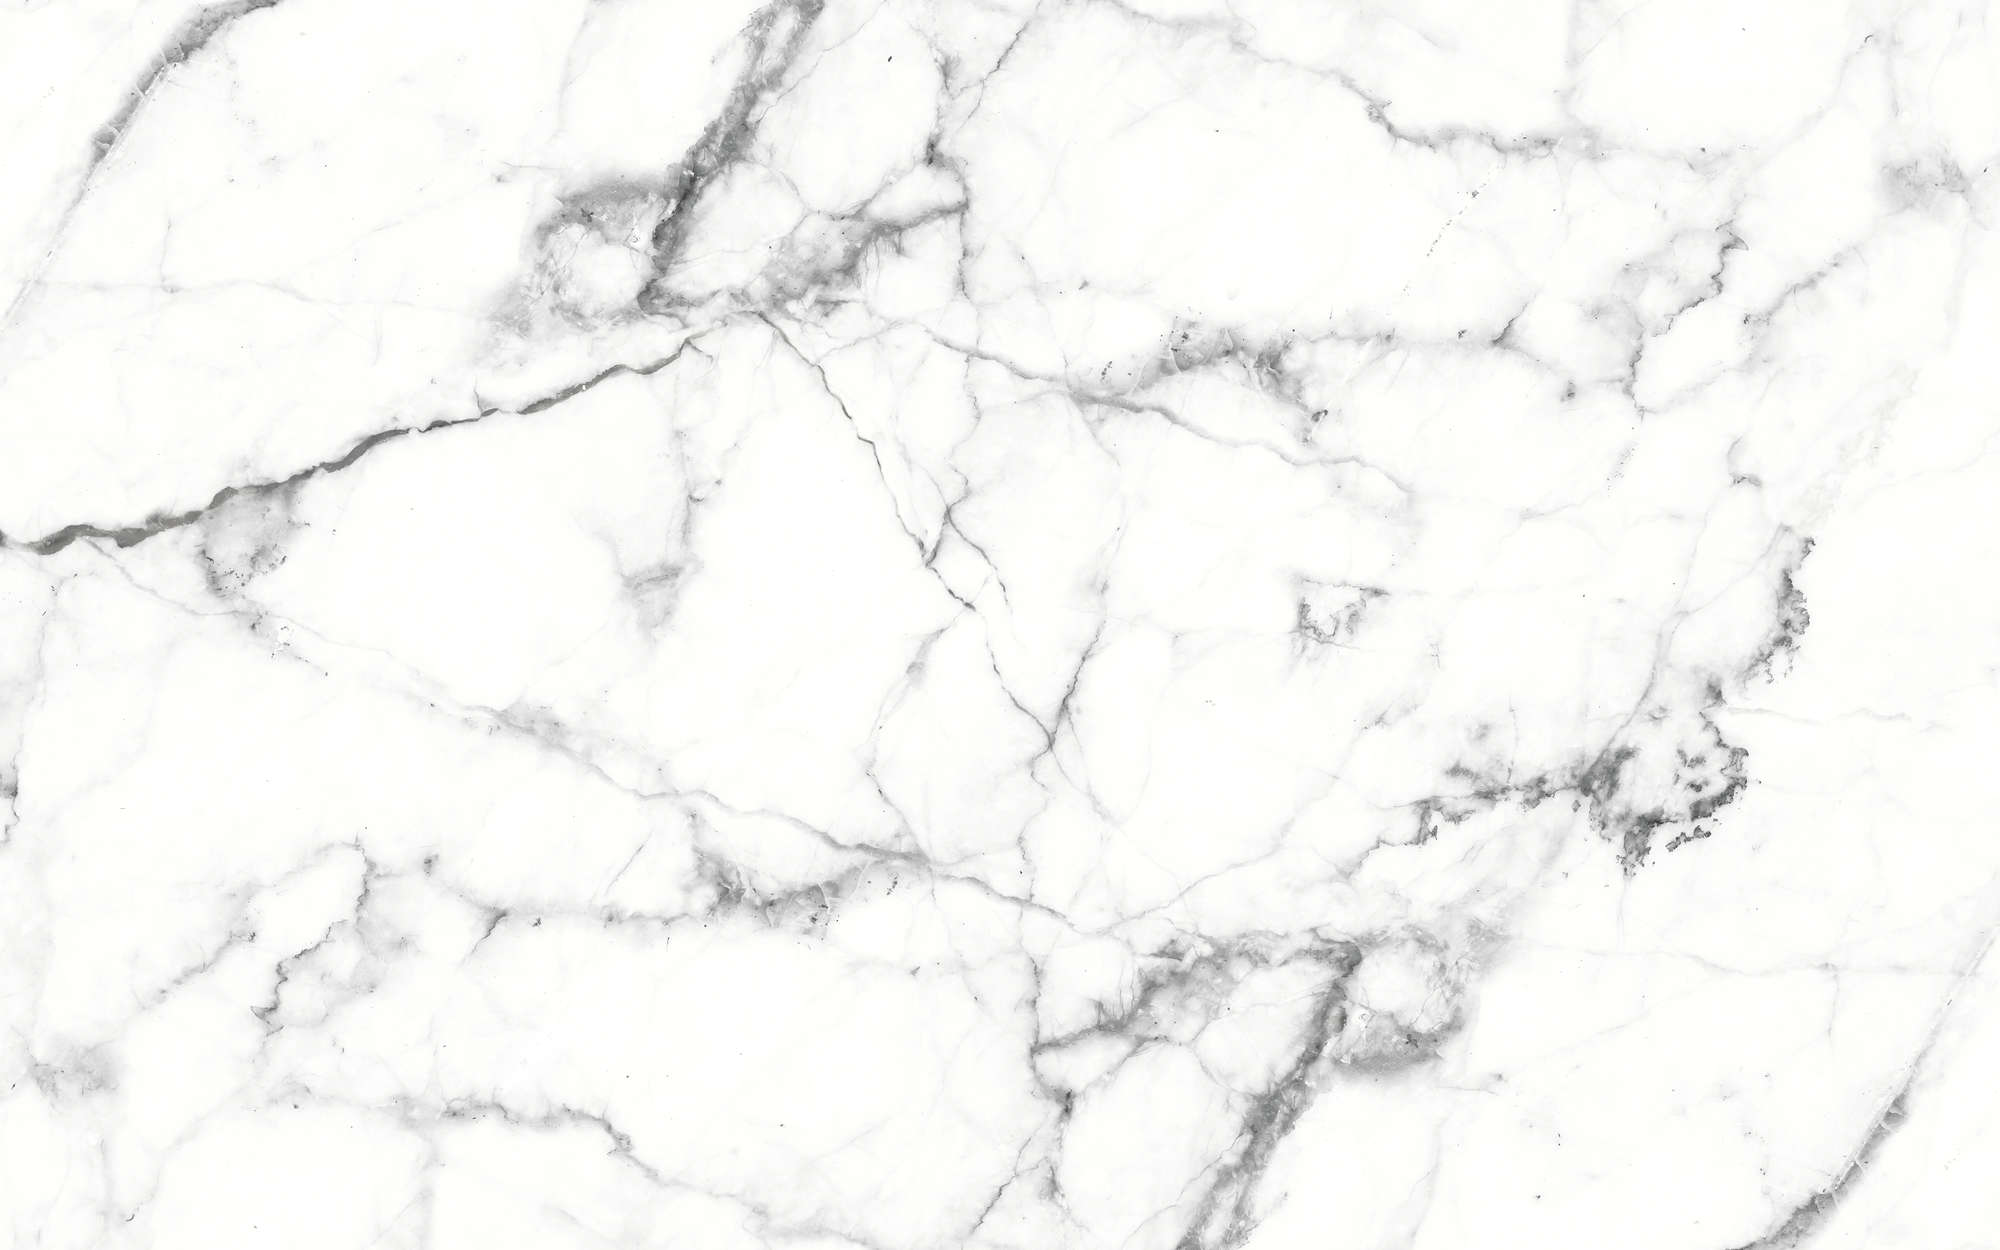             Marble mural light stone look marbled - white, black
        